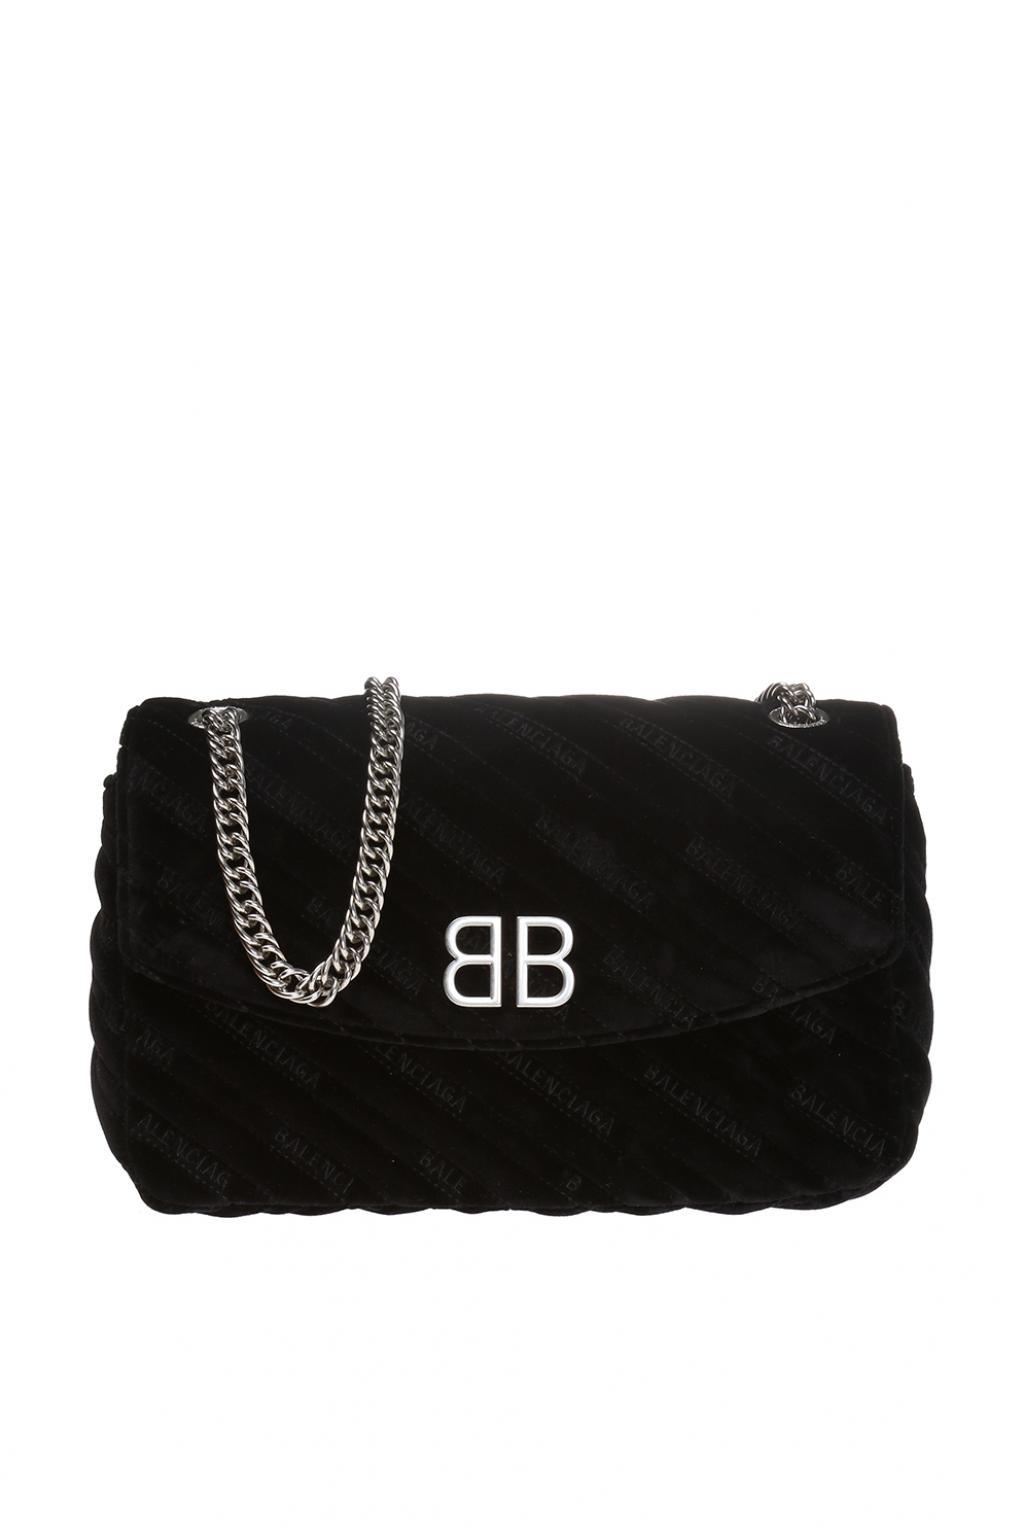 Balenciaga Leather 'bb' Quilted Bag With A Logo in Black | Lyst